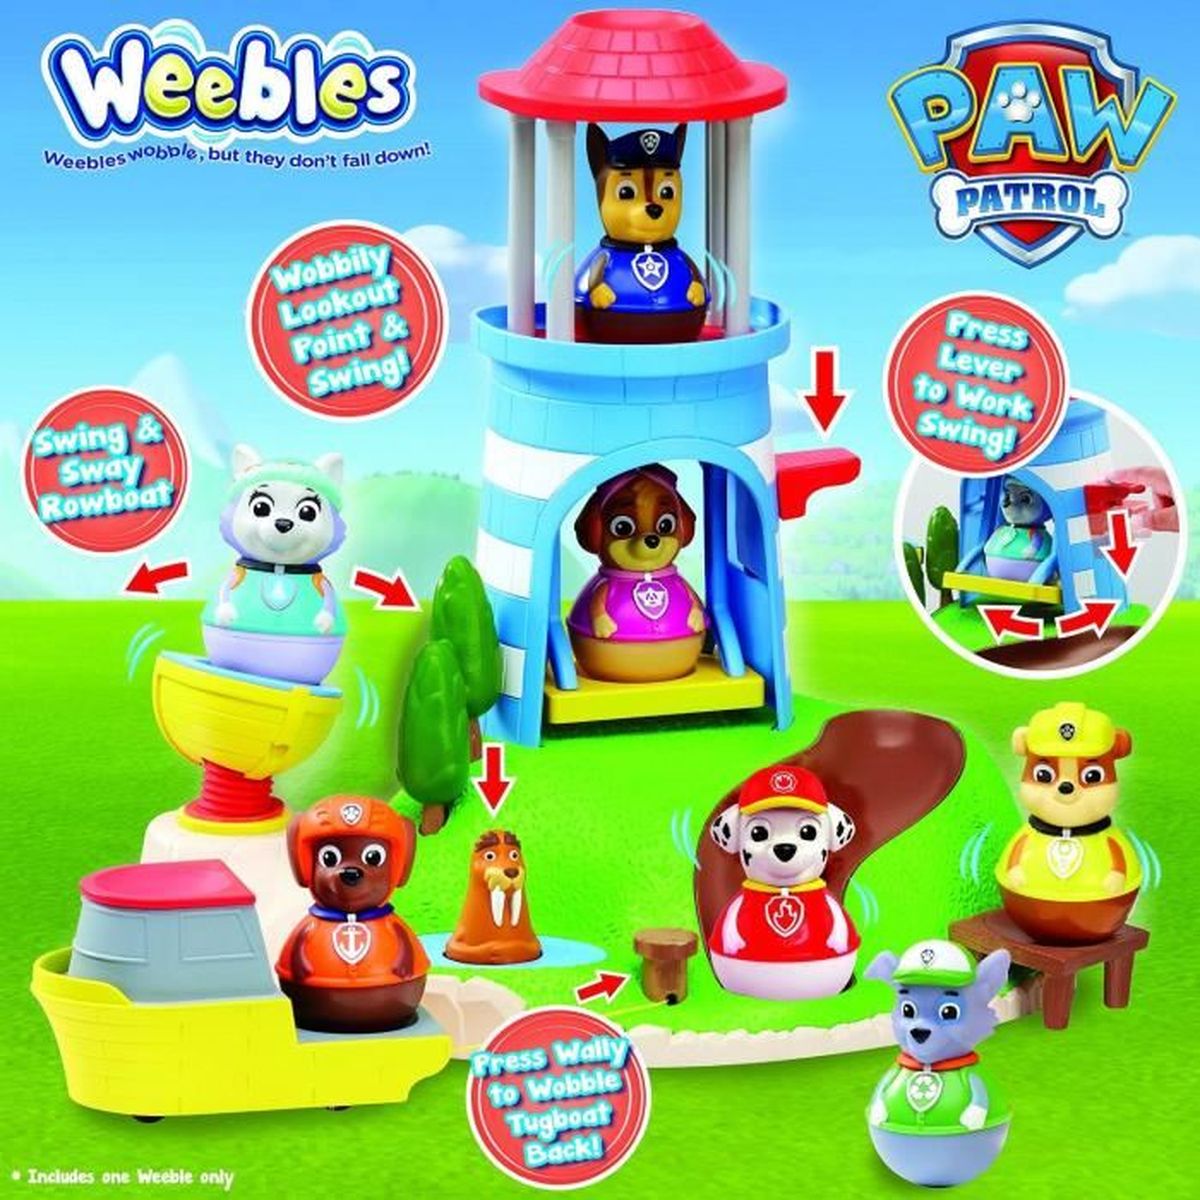 Paw Patrol Weebles Seal Island Playset Achat / Vente jouet à tirer Cdiscount